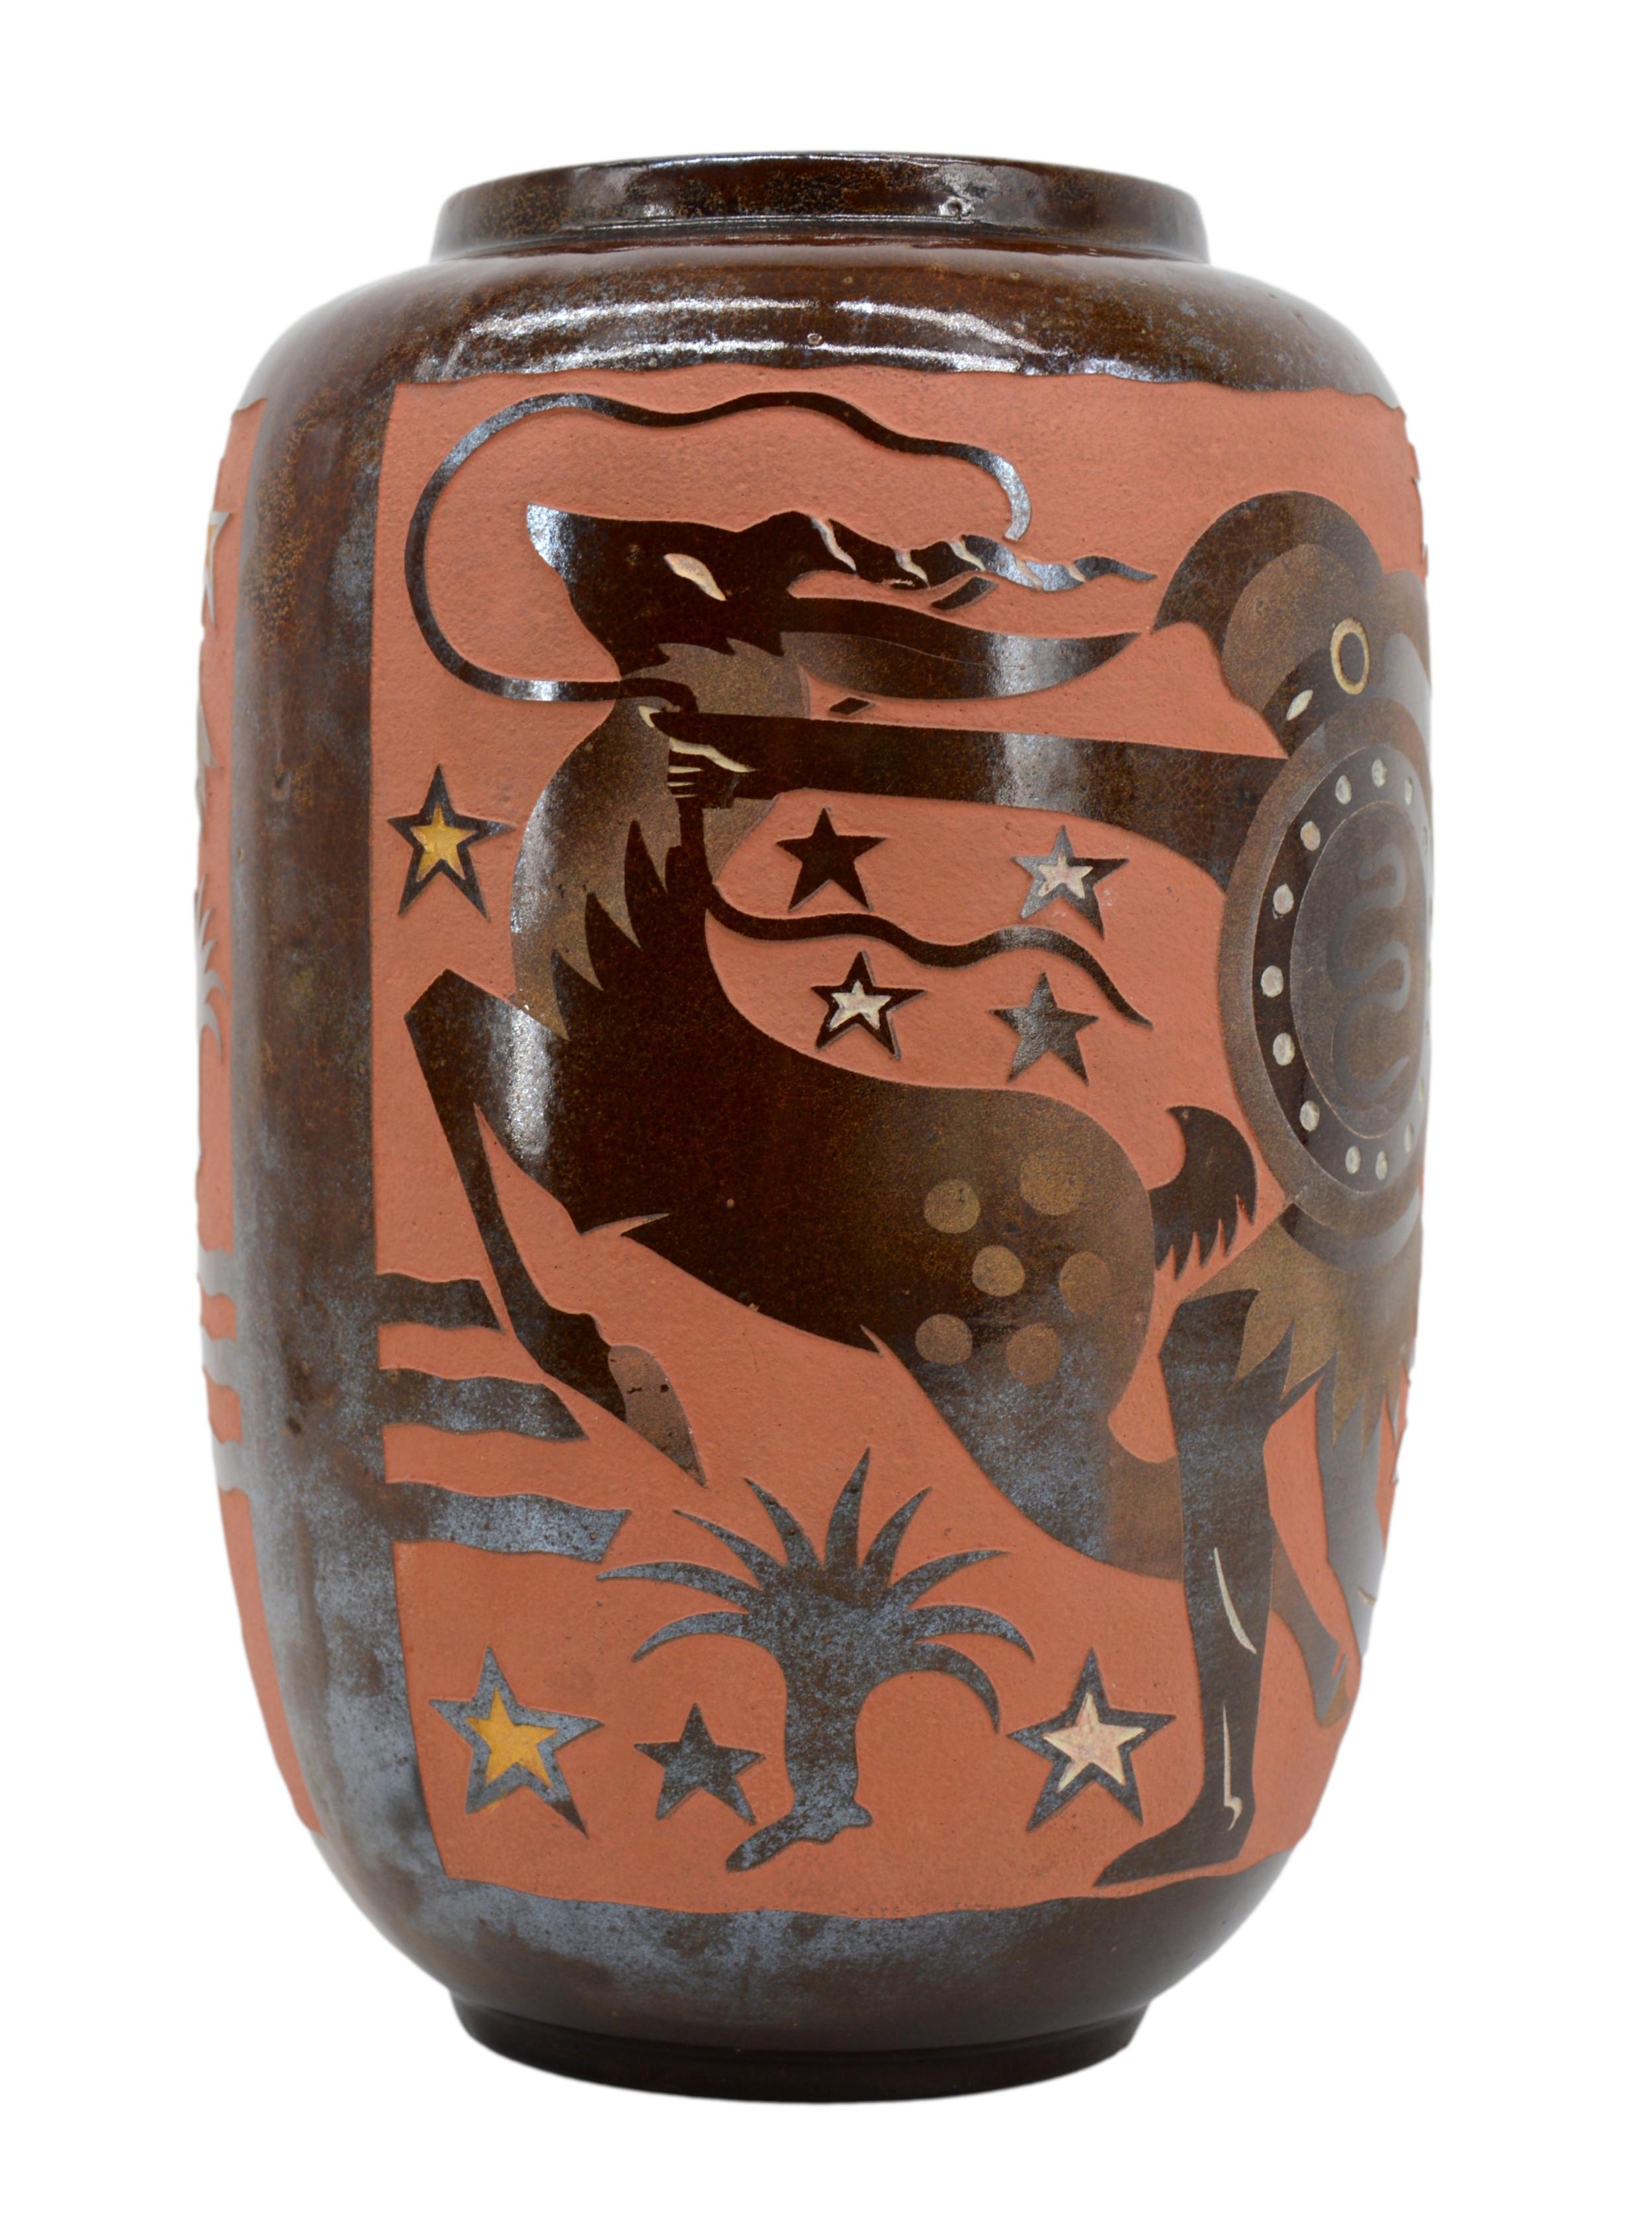 French Art Deco ceramic vase by Roger Mequinion, France, 1940s. Enameled surface. Sand-etched antique decor. Height : 11.2